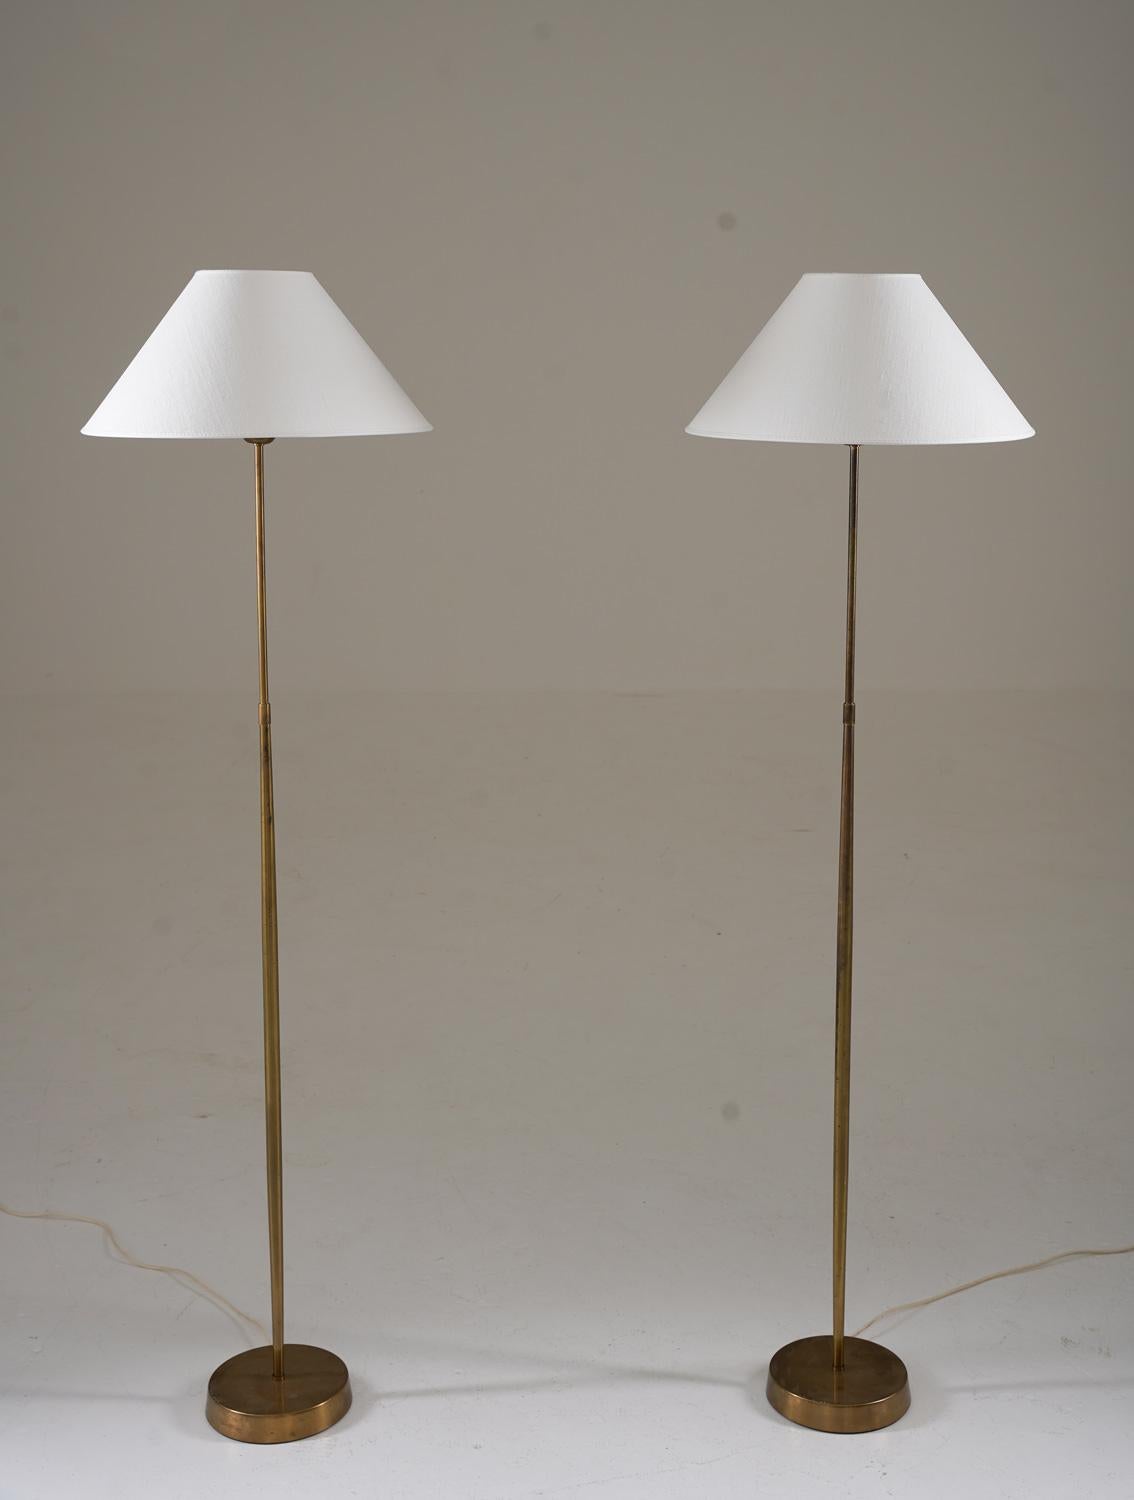 Pair of floor lamps by ASEA, Sweden, 1950s.
Beautiful lamps with a minimalistic design, where the slightly hourglass-shaped rods give an exclusive impression.

Condition: Good original condition with some light dents on the base and the shade